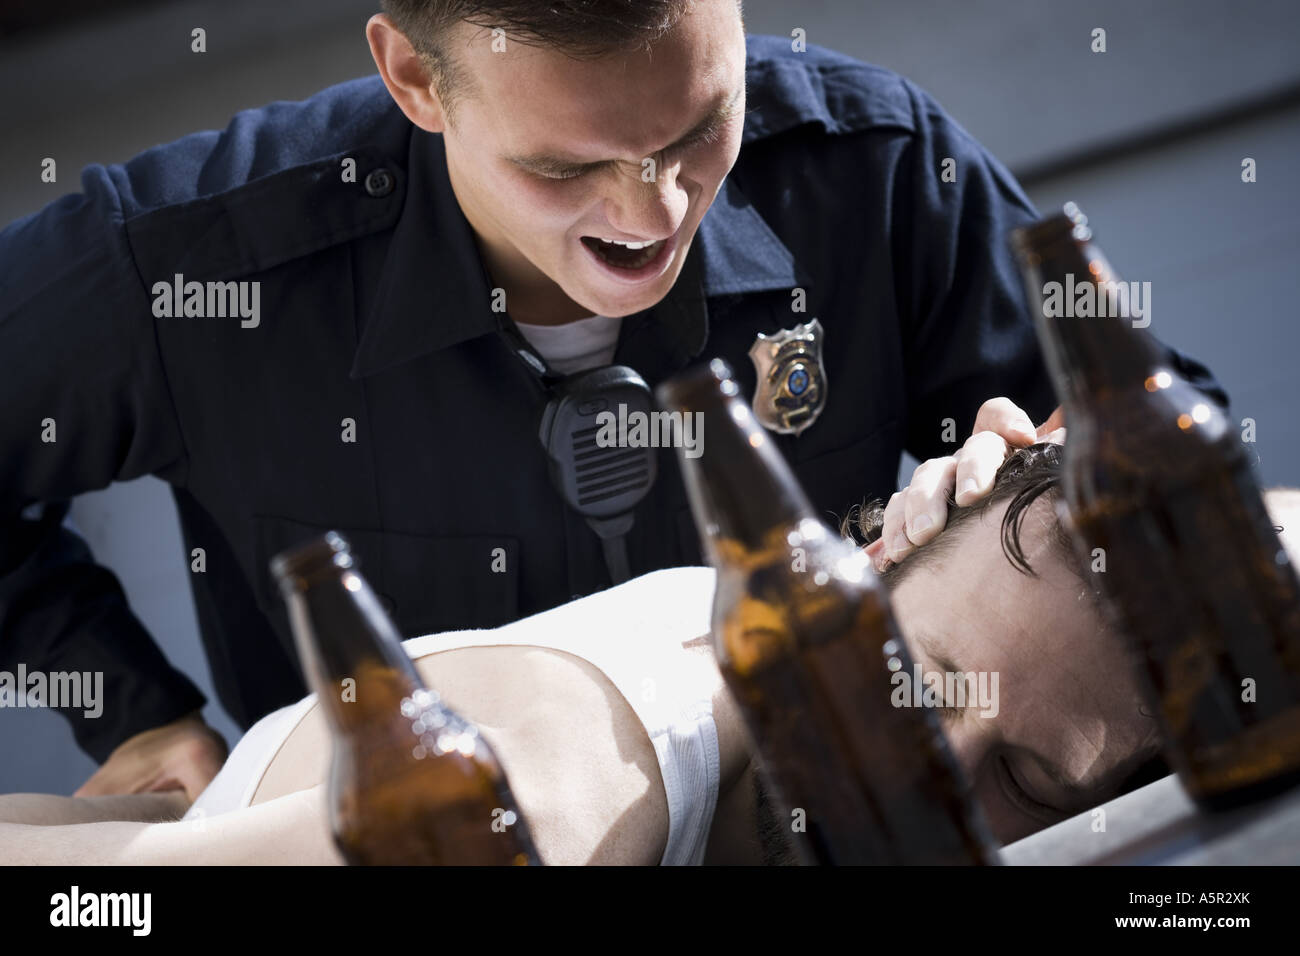 Police officer arresting man lying down with beer bottles Stock Photo